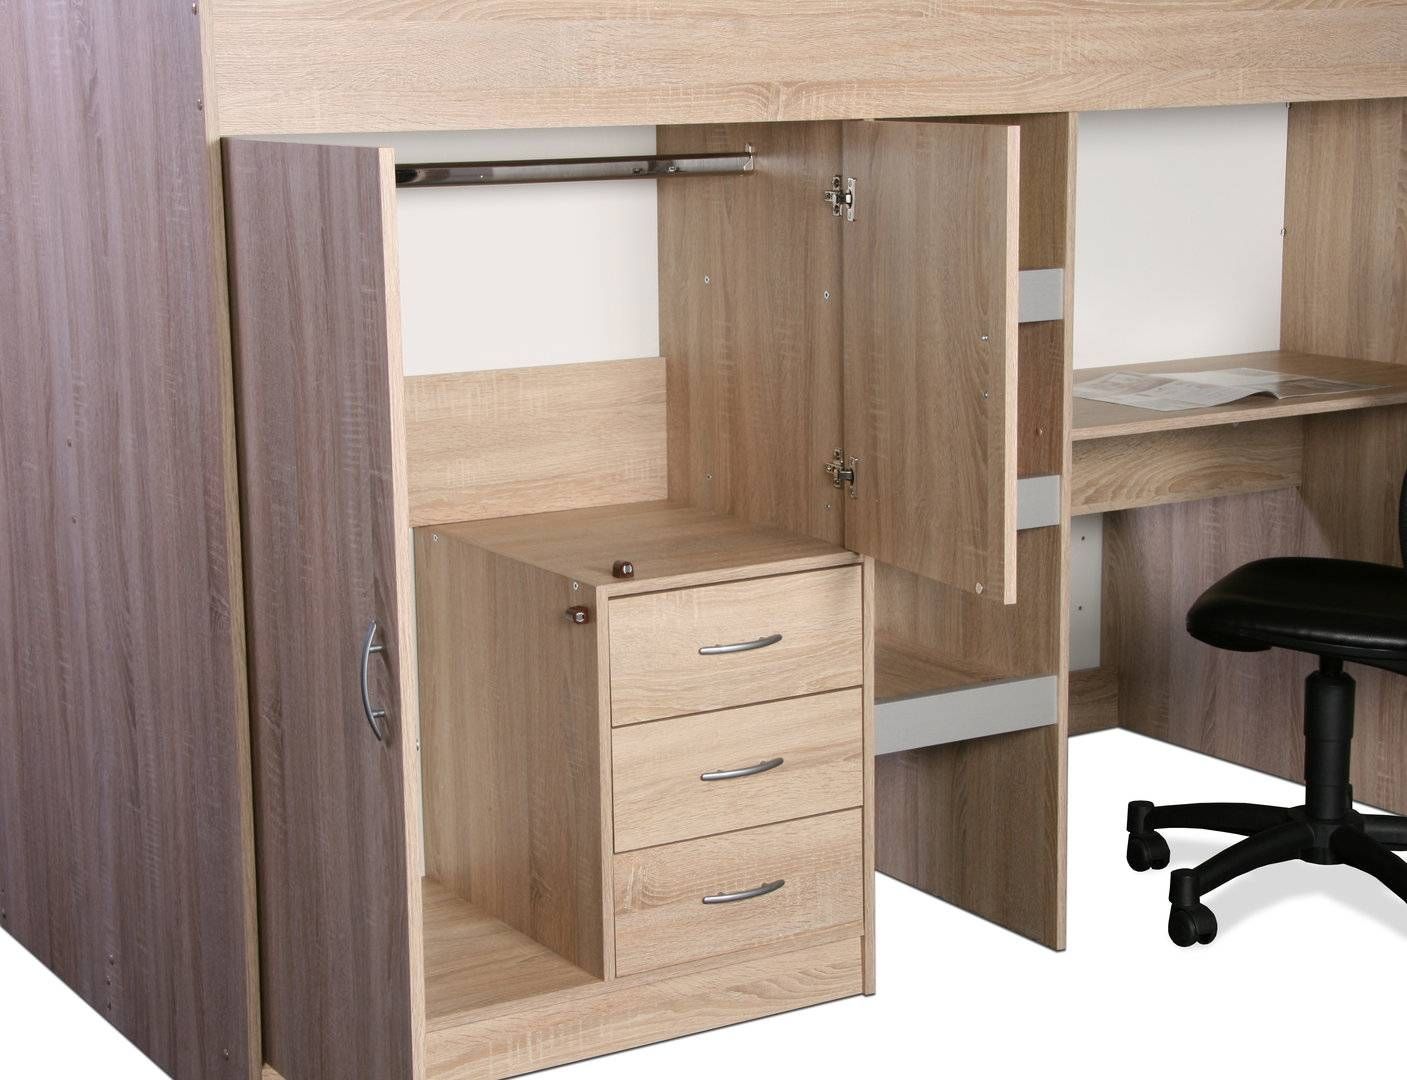 Brighton High Cabin Sleeper Bed – Rutland Furniture Throughout High Sleeper With Desk And Wardrobes (View 10 of 15)